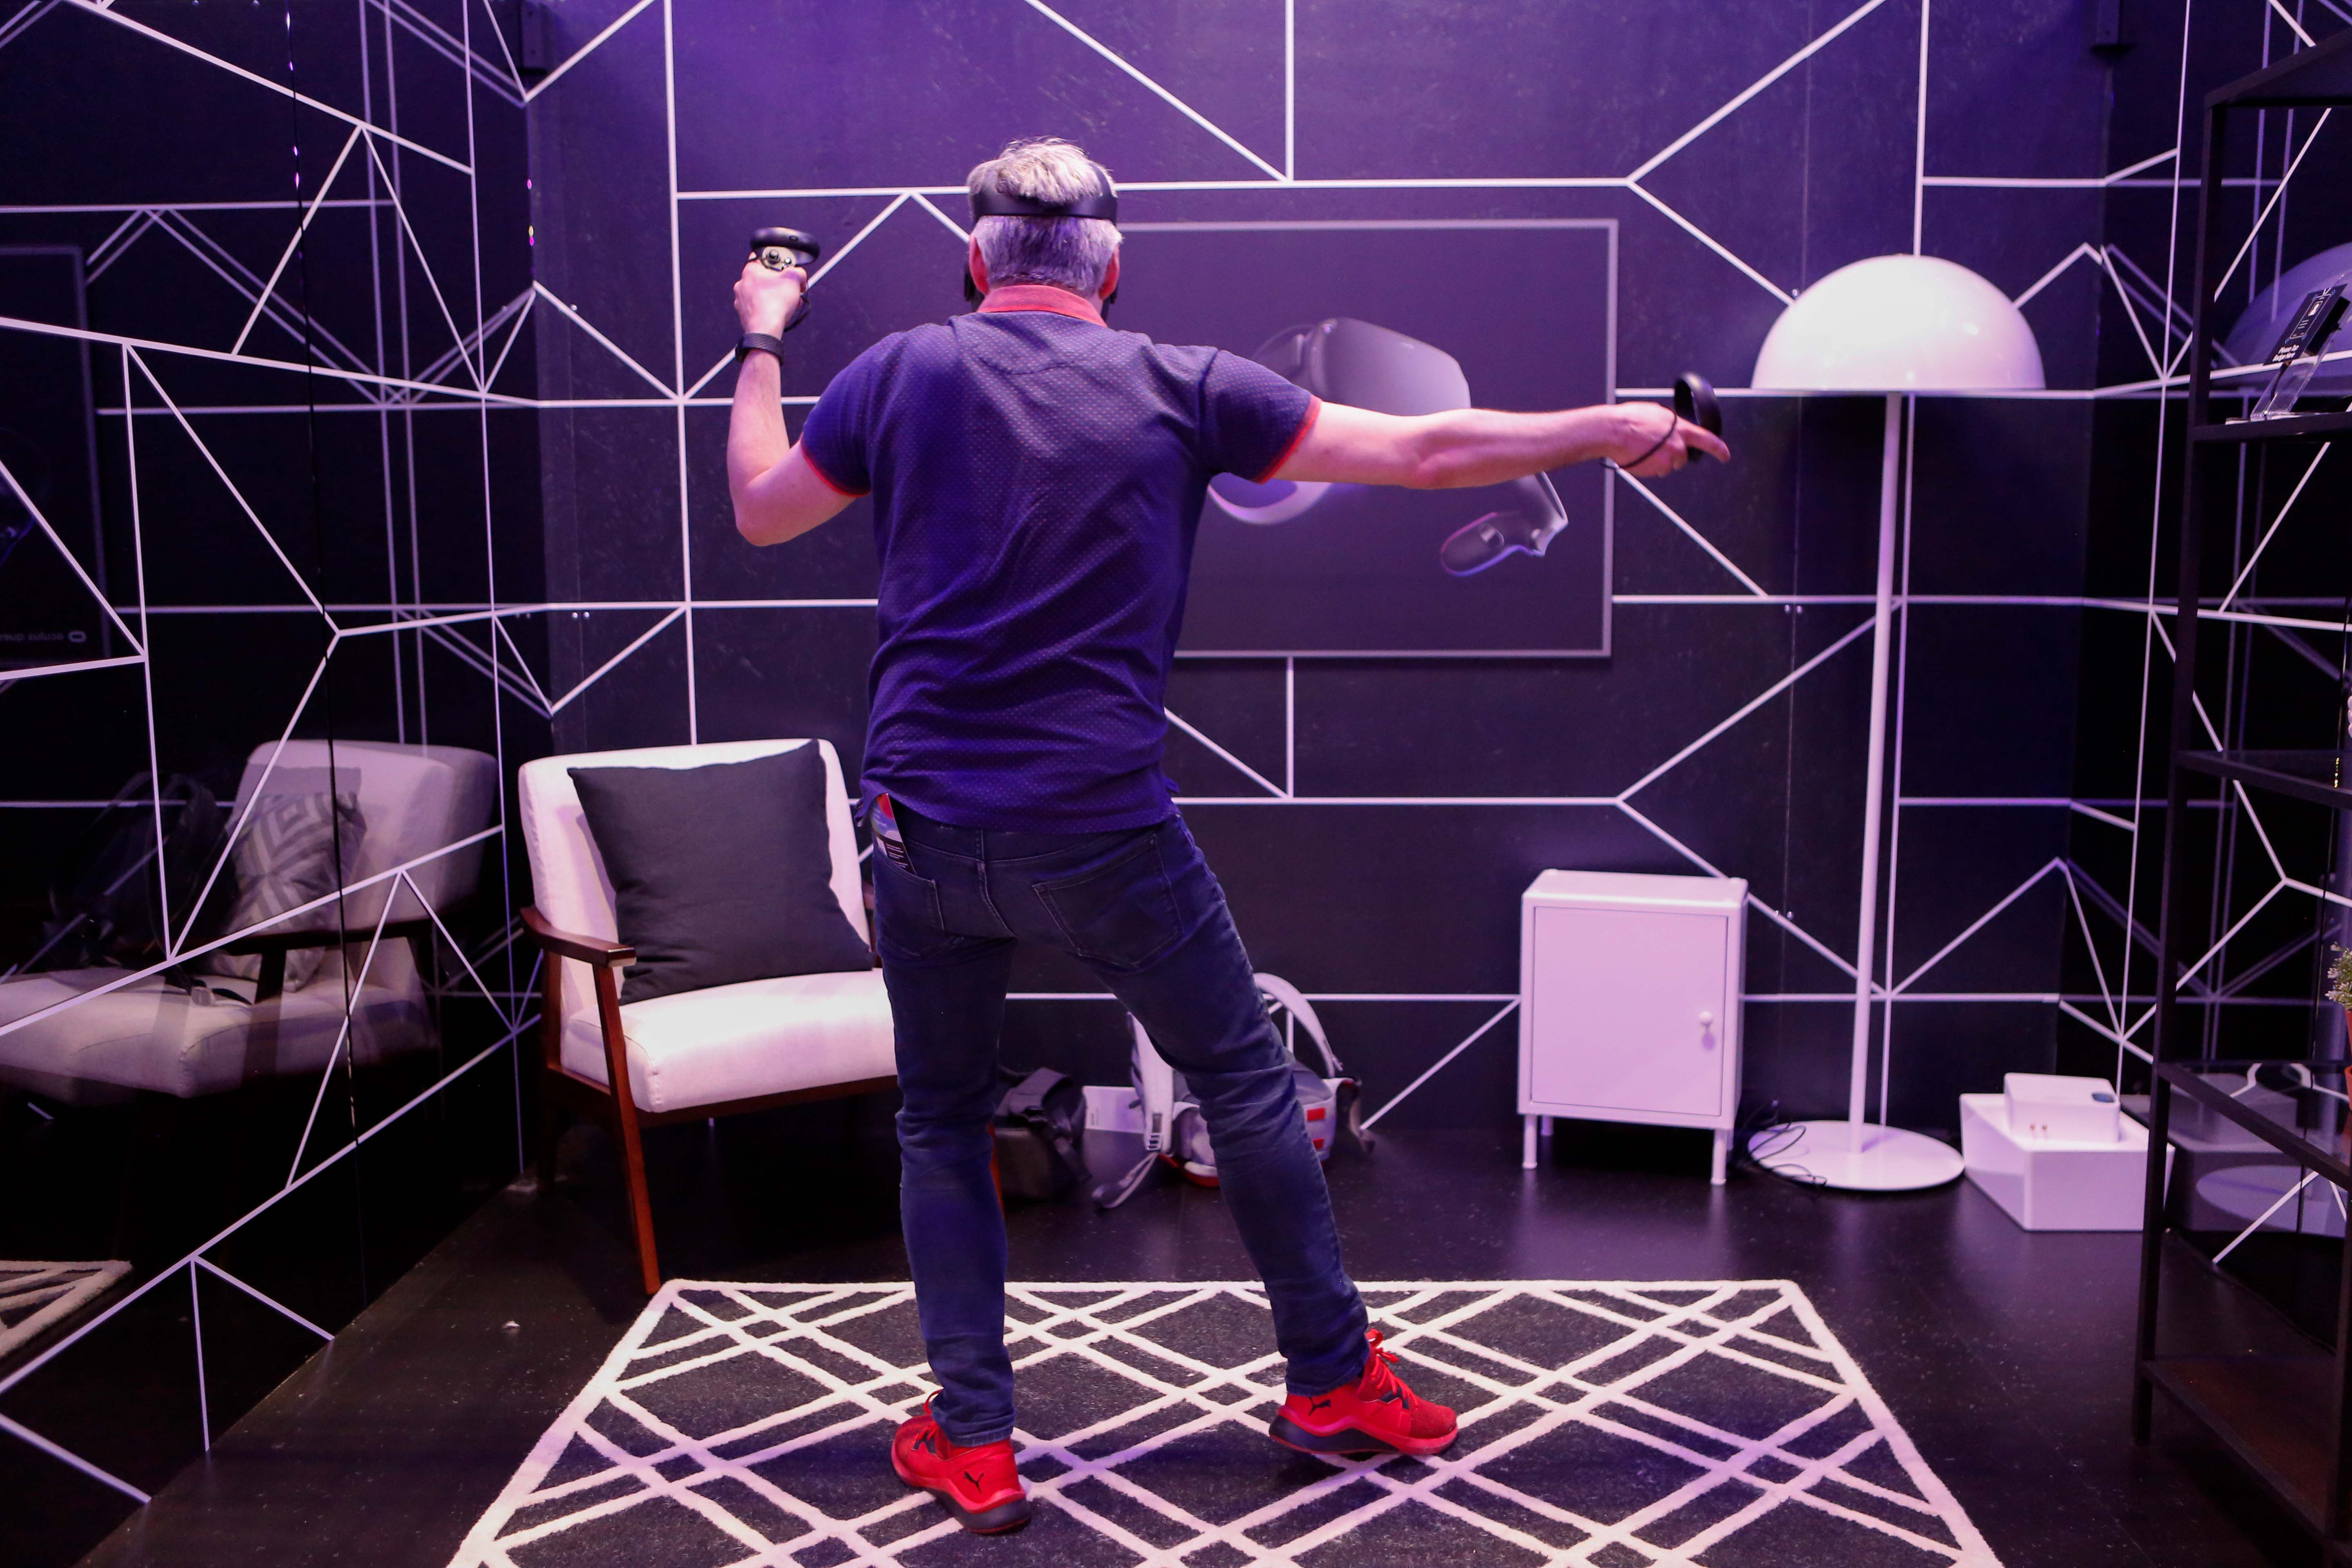 What is it like to live a virtual reality experience